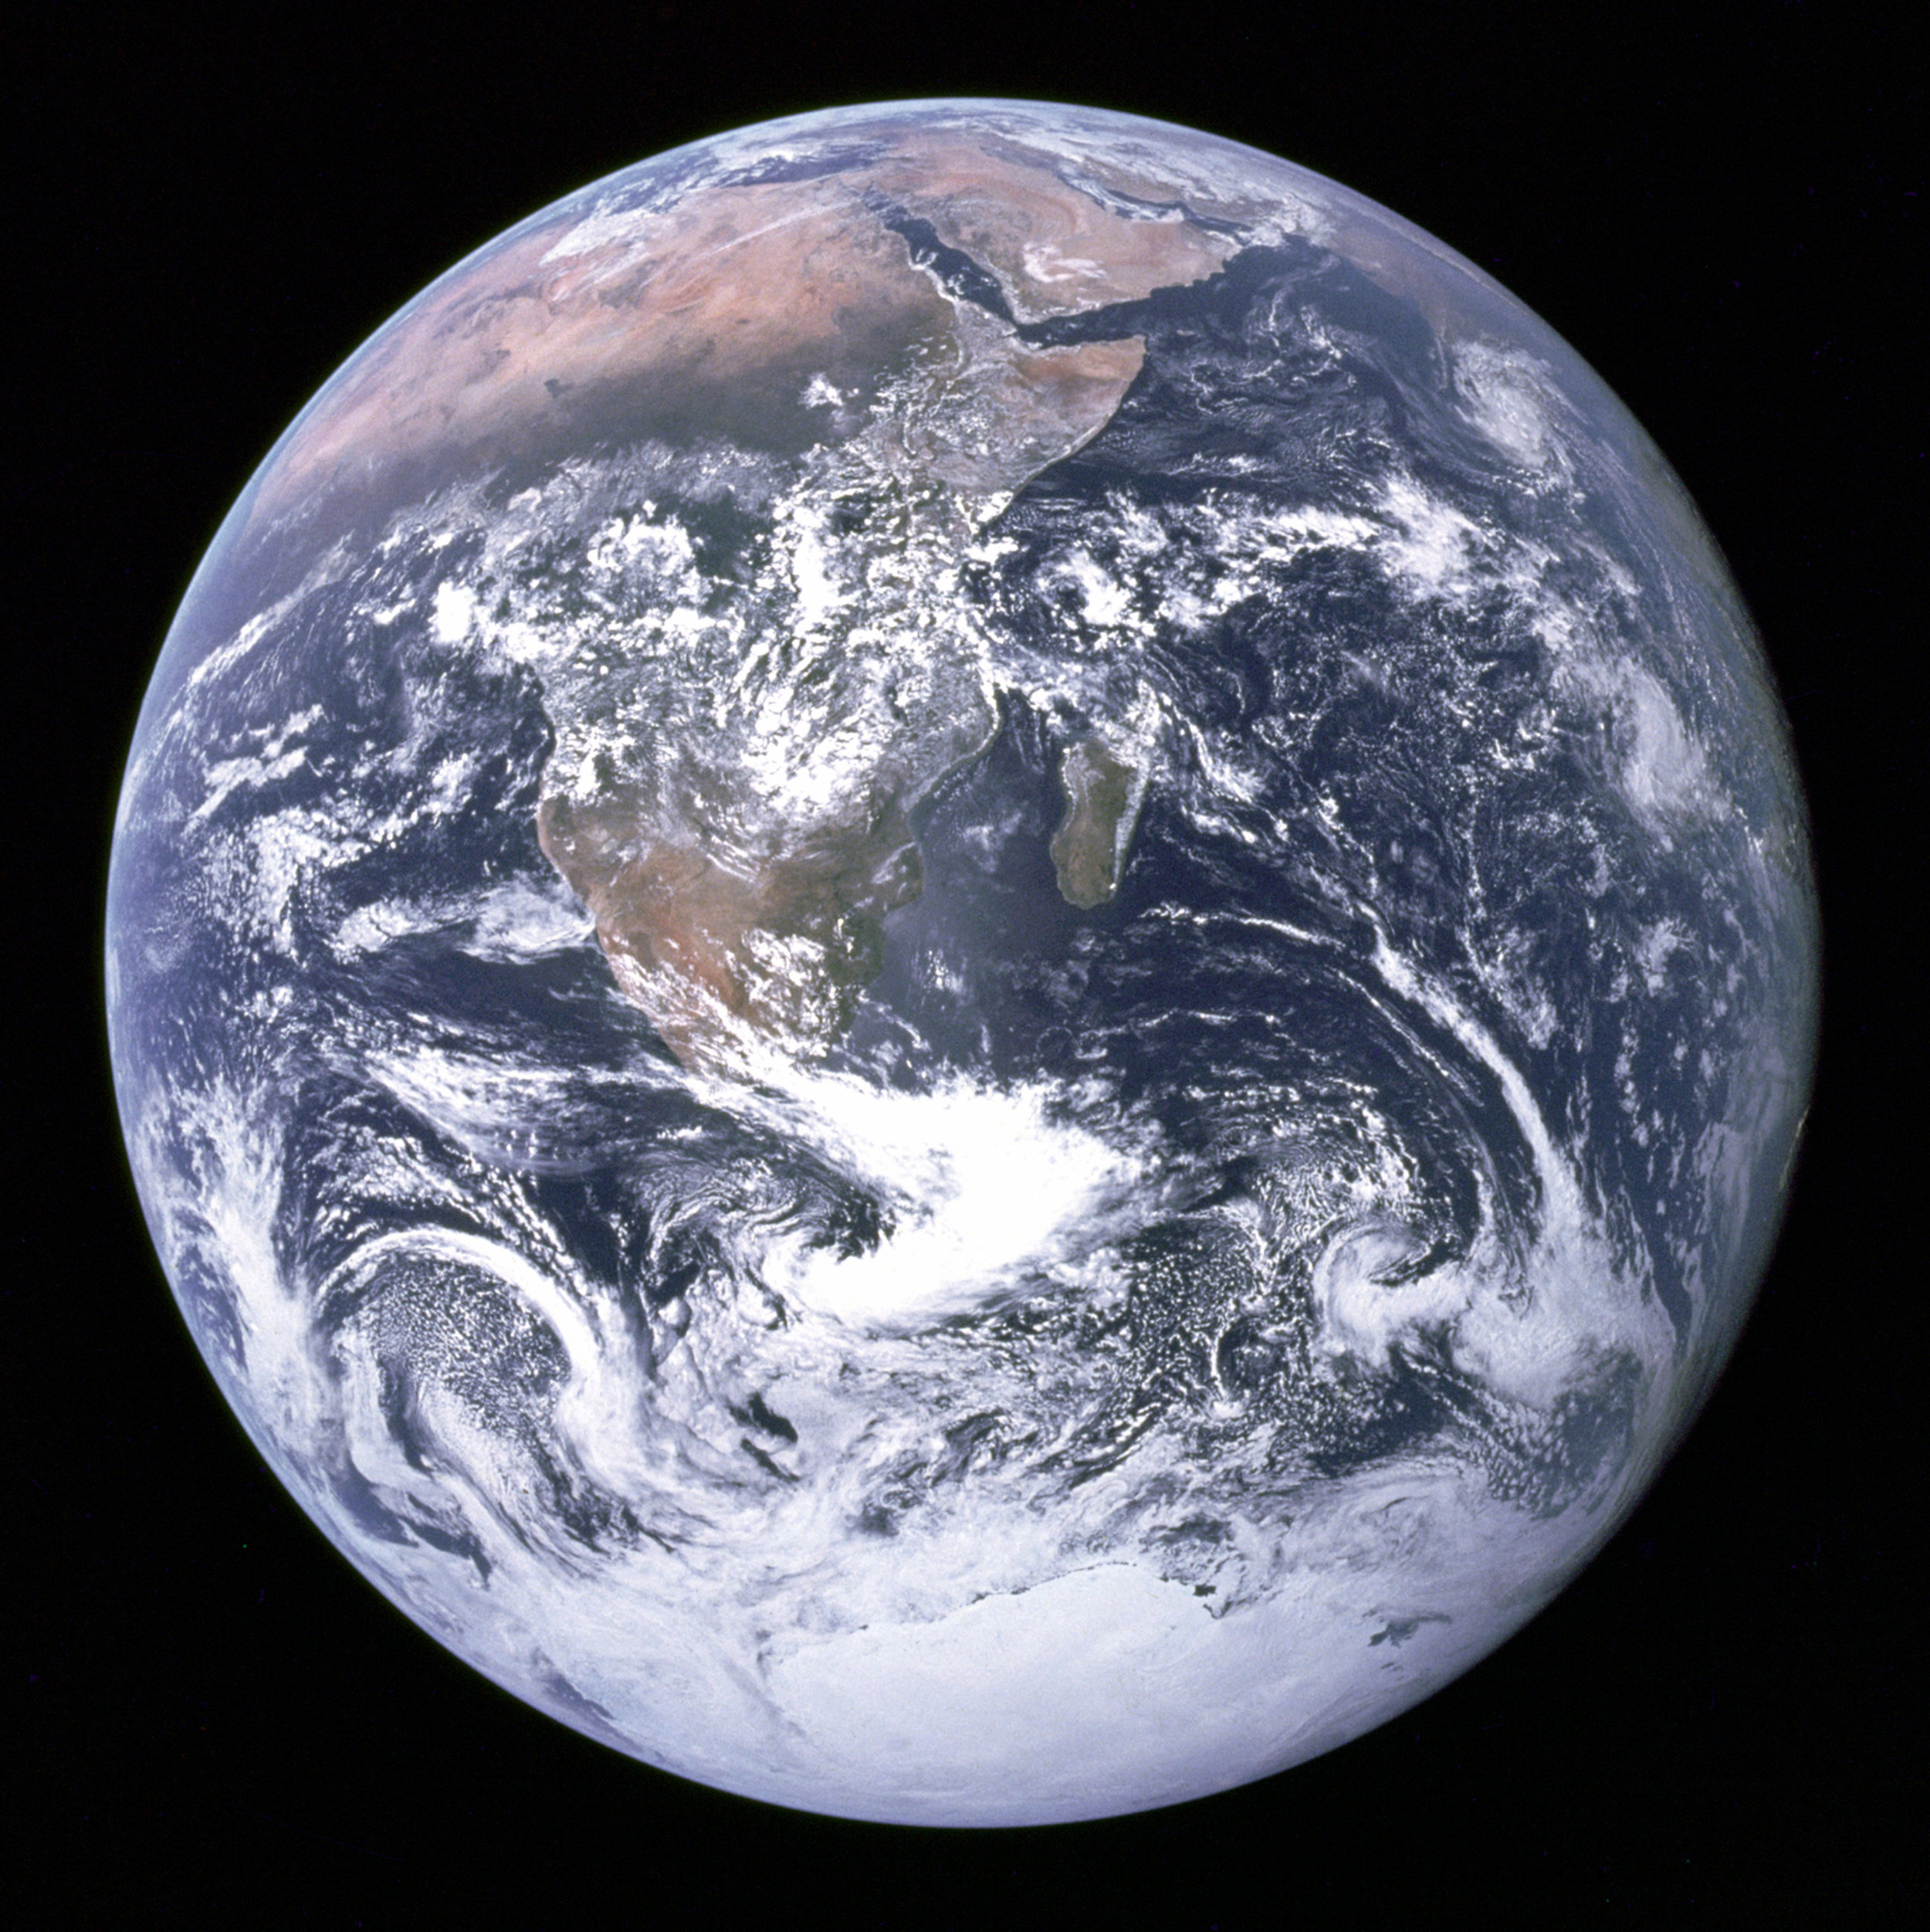 the Earth from space, taken by astronauts aboard Apollo 17 in 1972